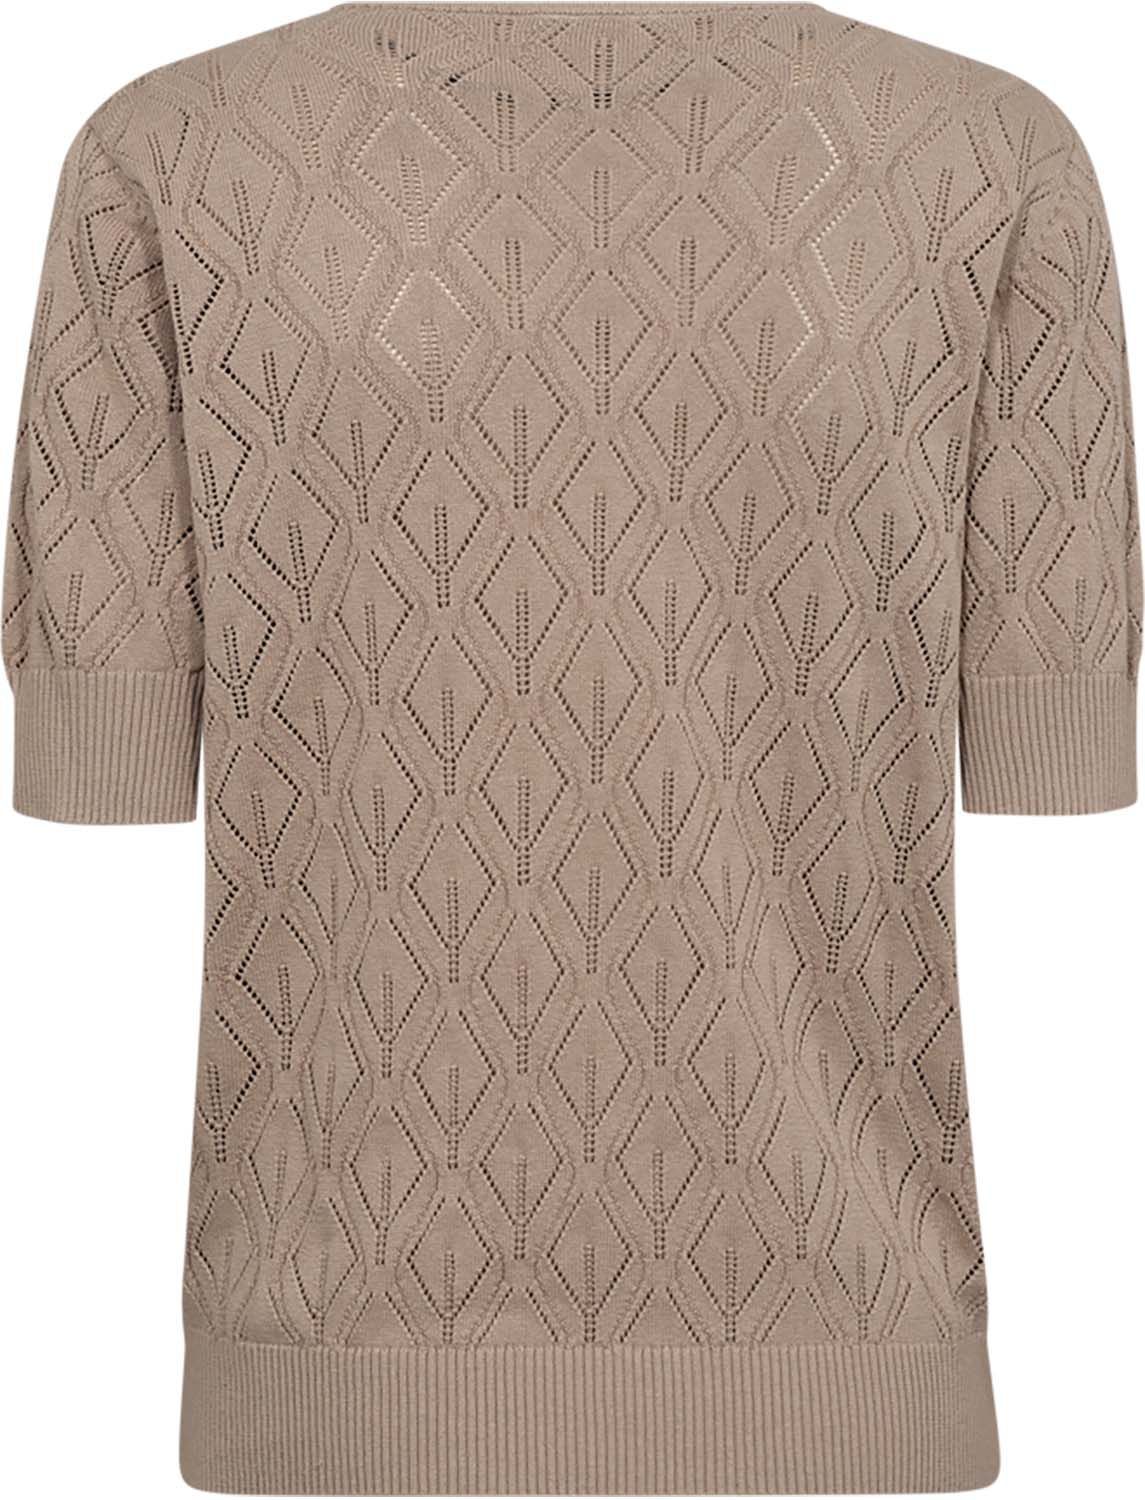 Freequent Shirt Dodo Taupe